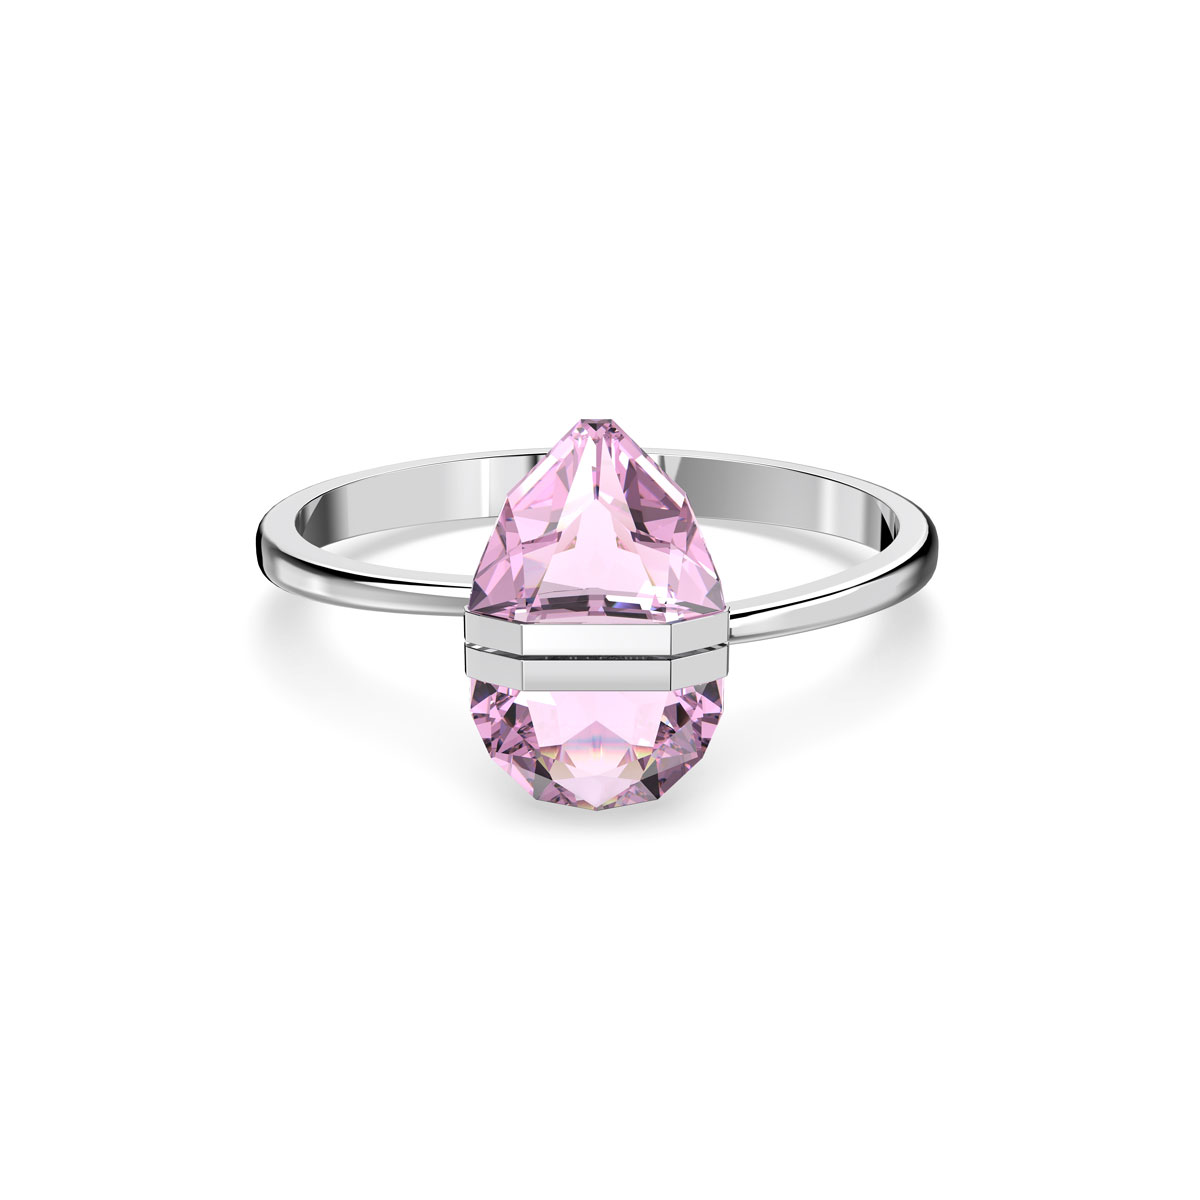 Swarovski Lucent Bangle, Pink, Stainless Steel, Small